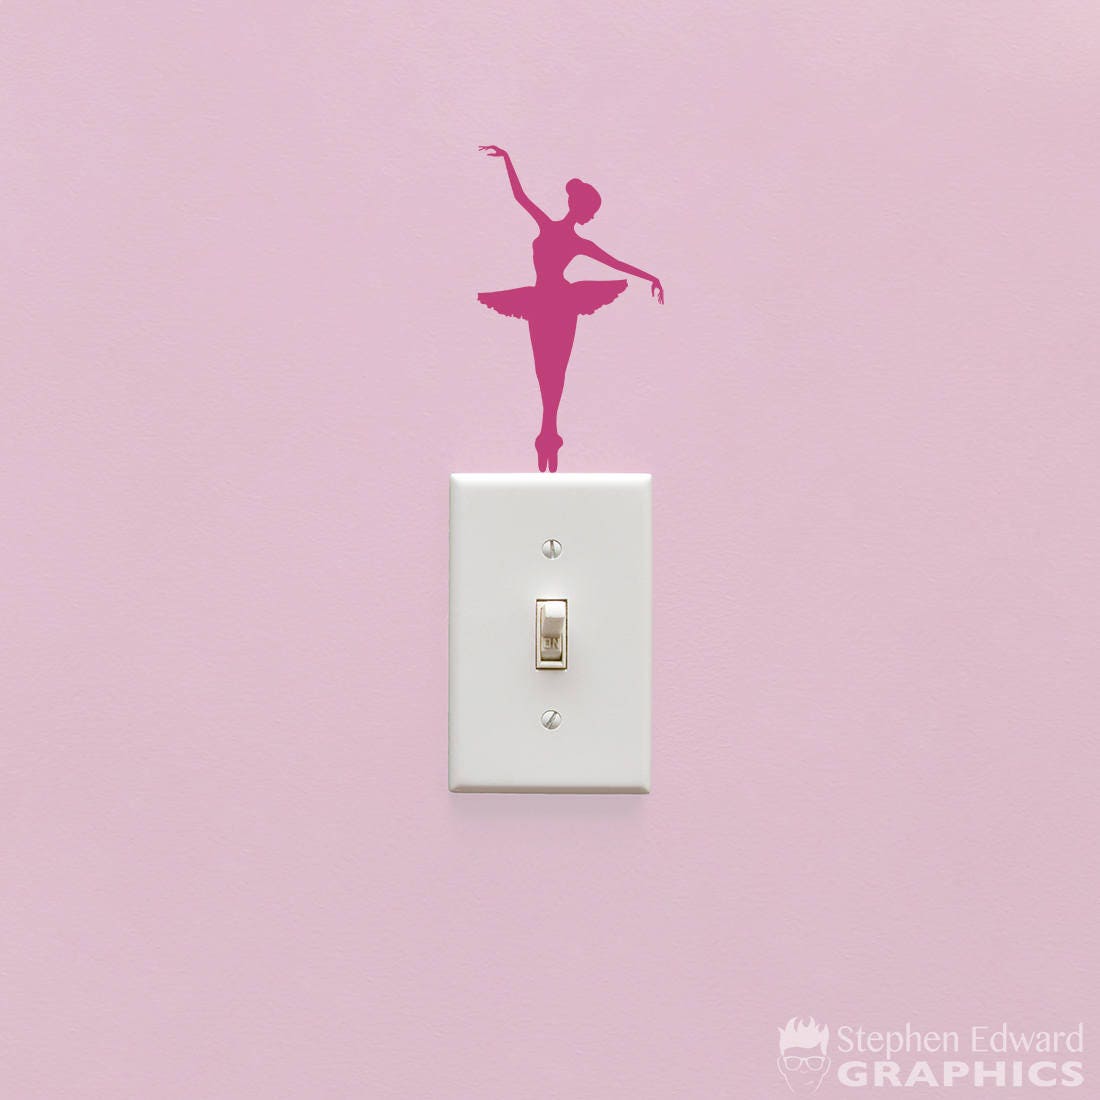 Ballerina Light Switch Decal - Lightswitch Ballet Decal - Light Switch Cover decor